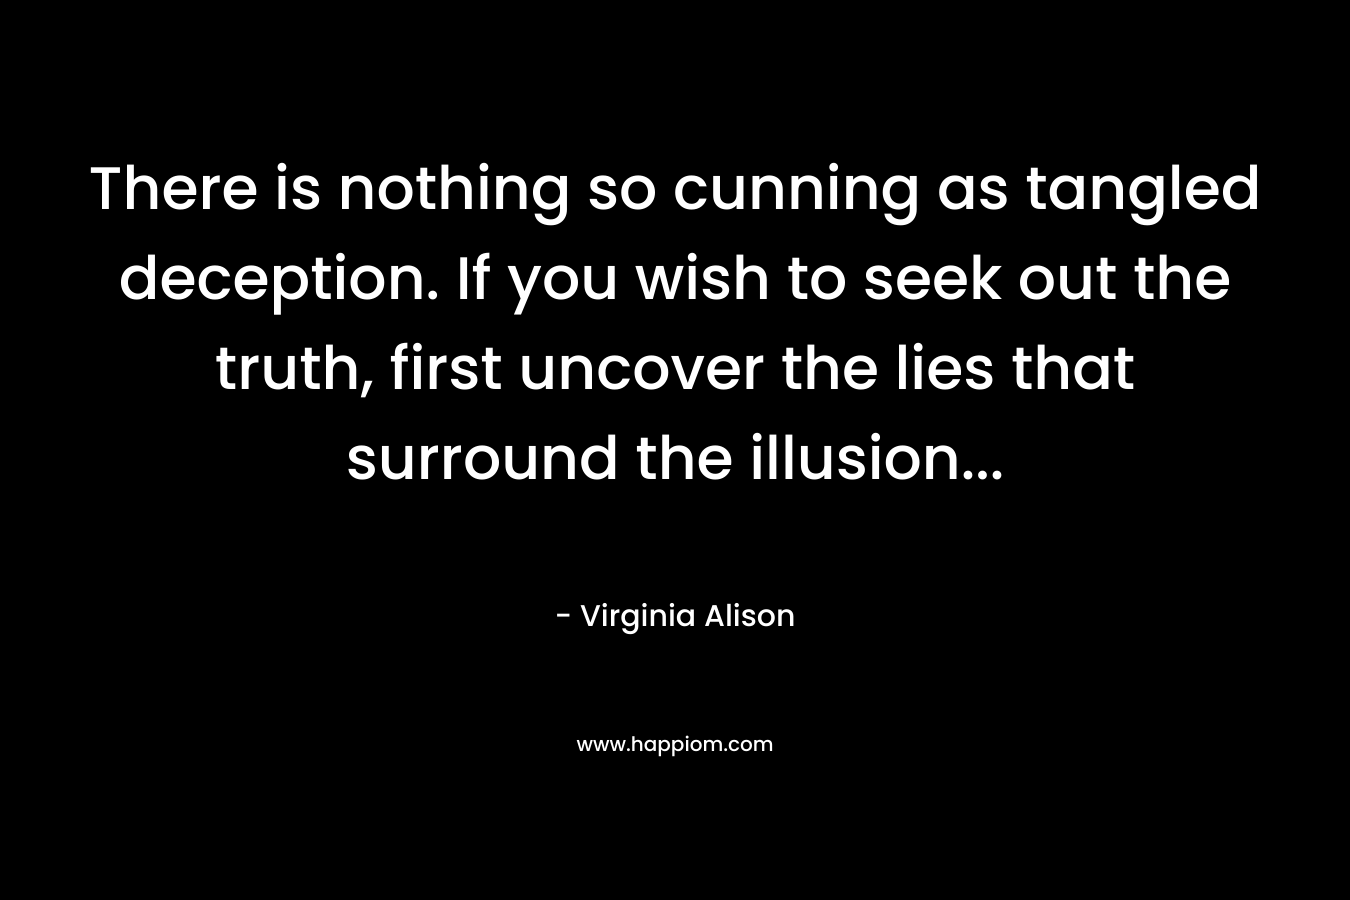 There is nothing so cunning as tangled deception. If you wish to seek out the truth, first uncover the lies that surround the illusion… – Virginia Alison